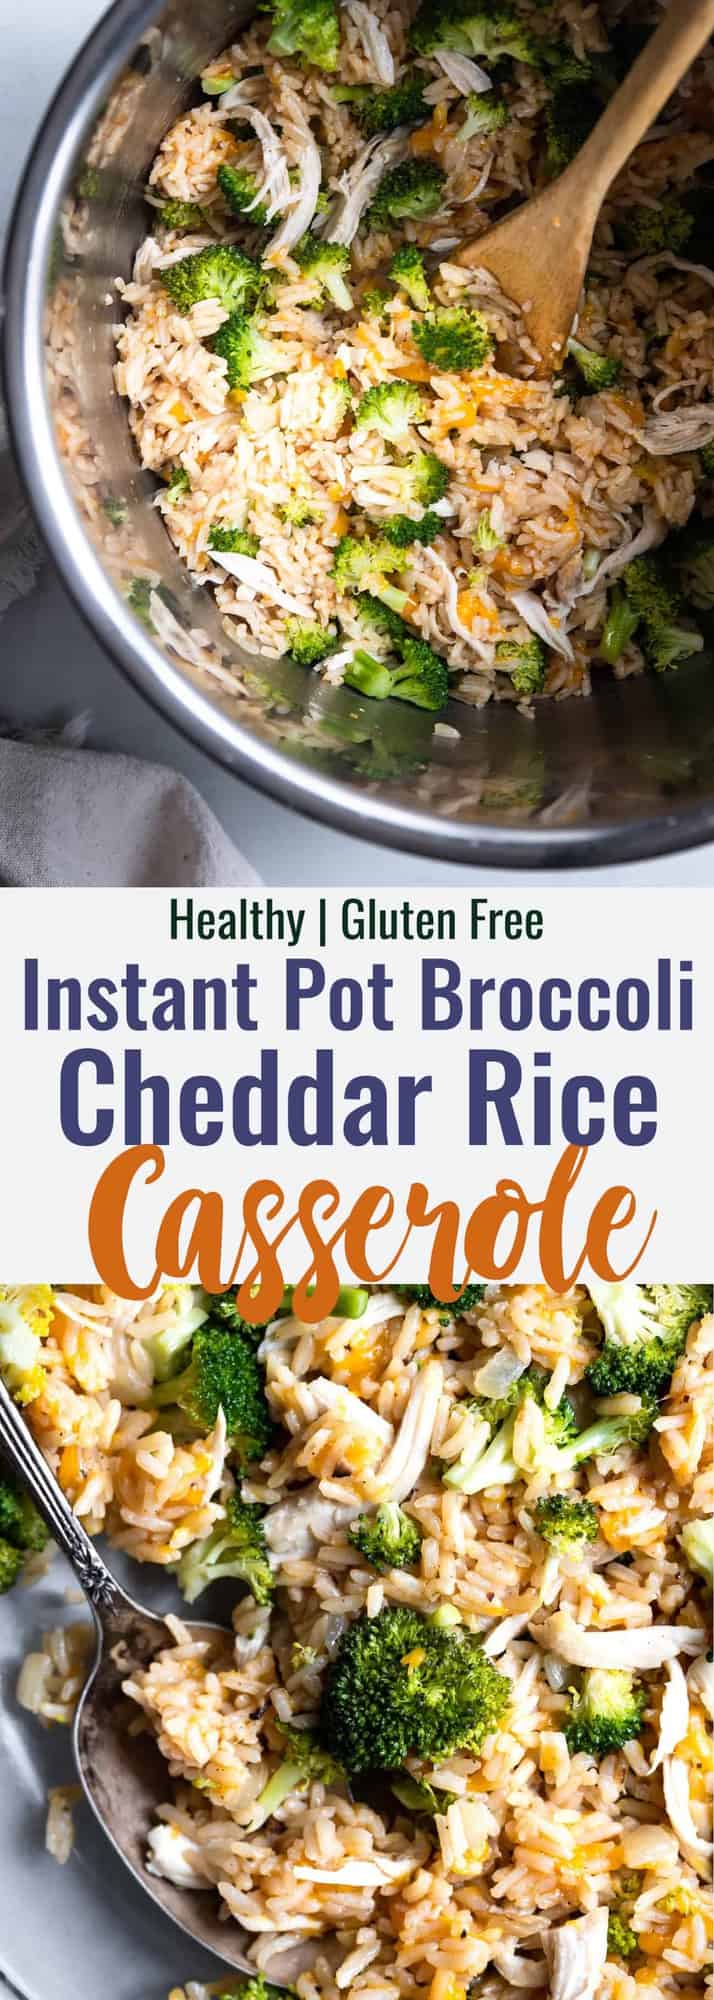 Instant Pot Broccoli Cheese and Chicken Rice Casserole - This gluten free Instant Pot chicken and rice casserole with broccoli is an easy, weeknight dinner that almost makes itself! Even picky kids will love it and great for meal prep! | #Foodfaithfitness | #healthy #glutenfree #Instantpot #dinner #kidfriendly